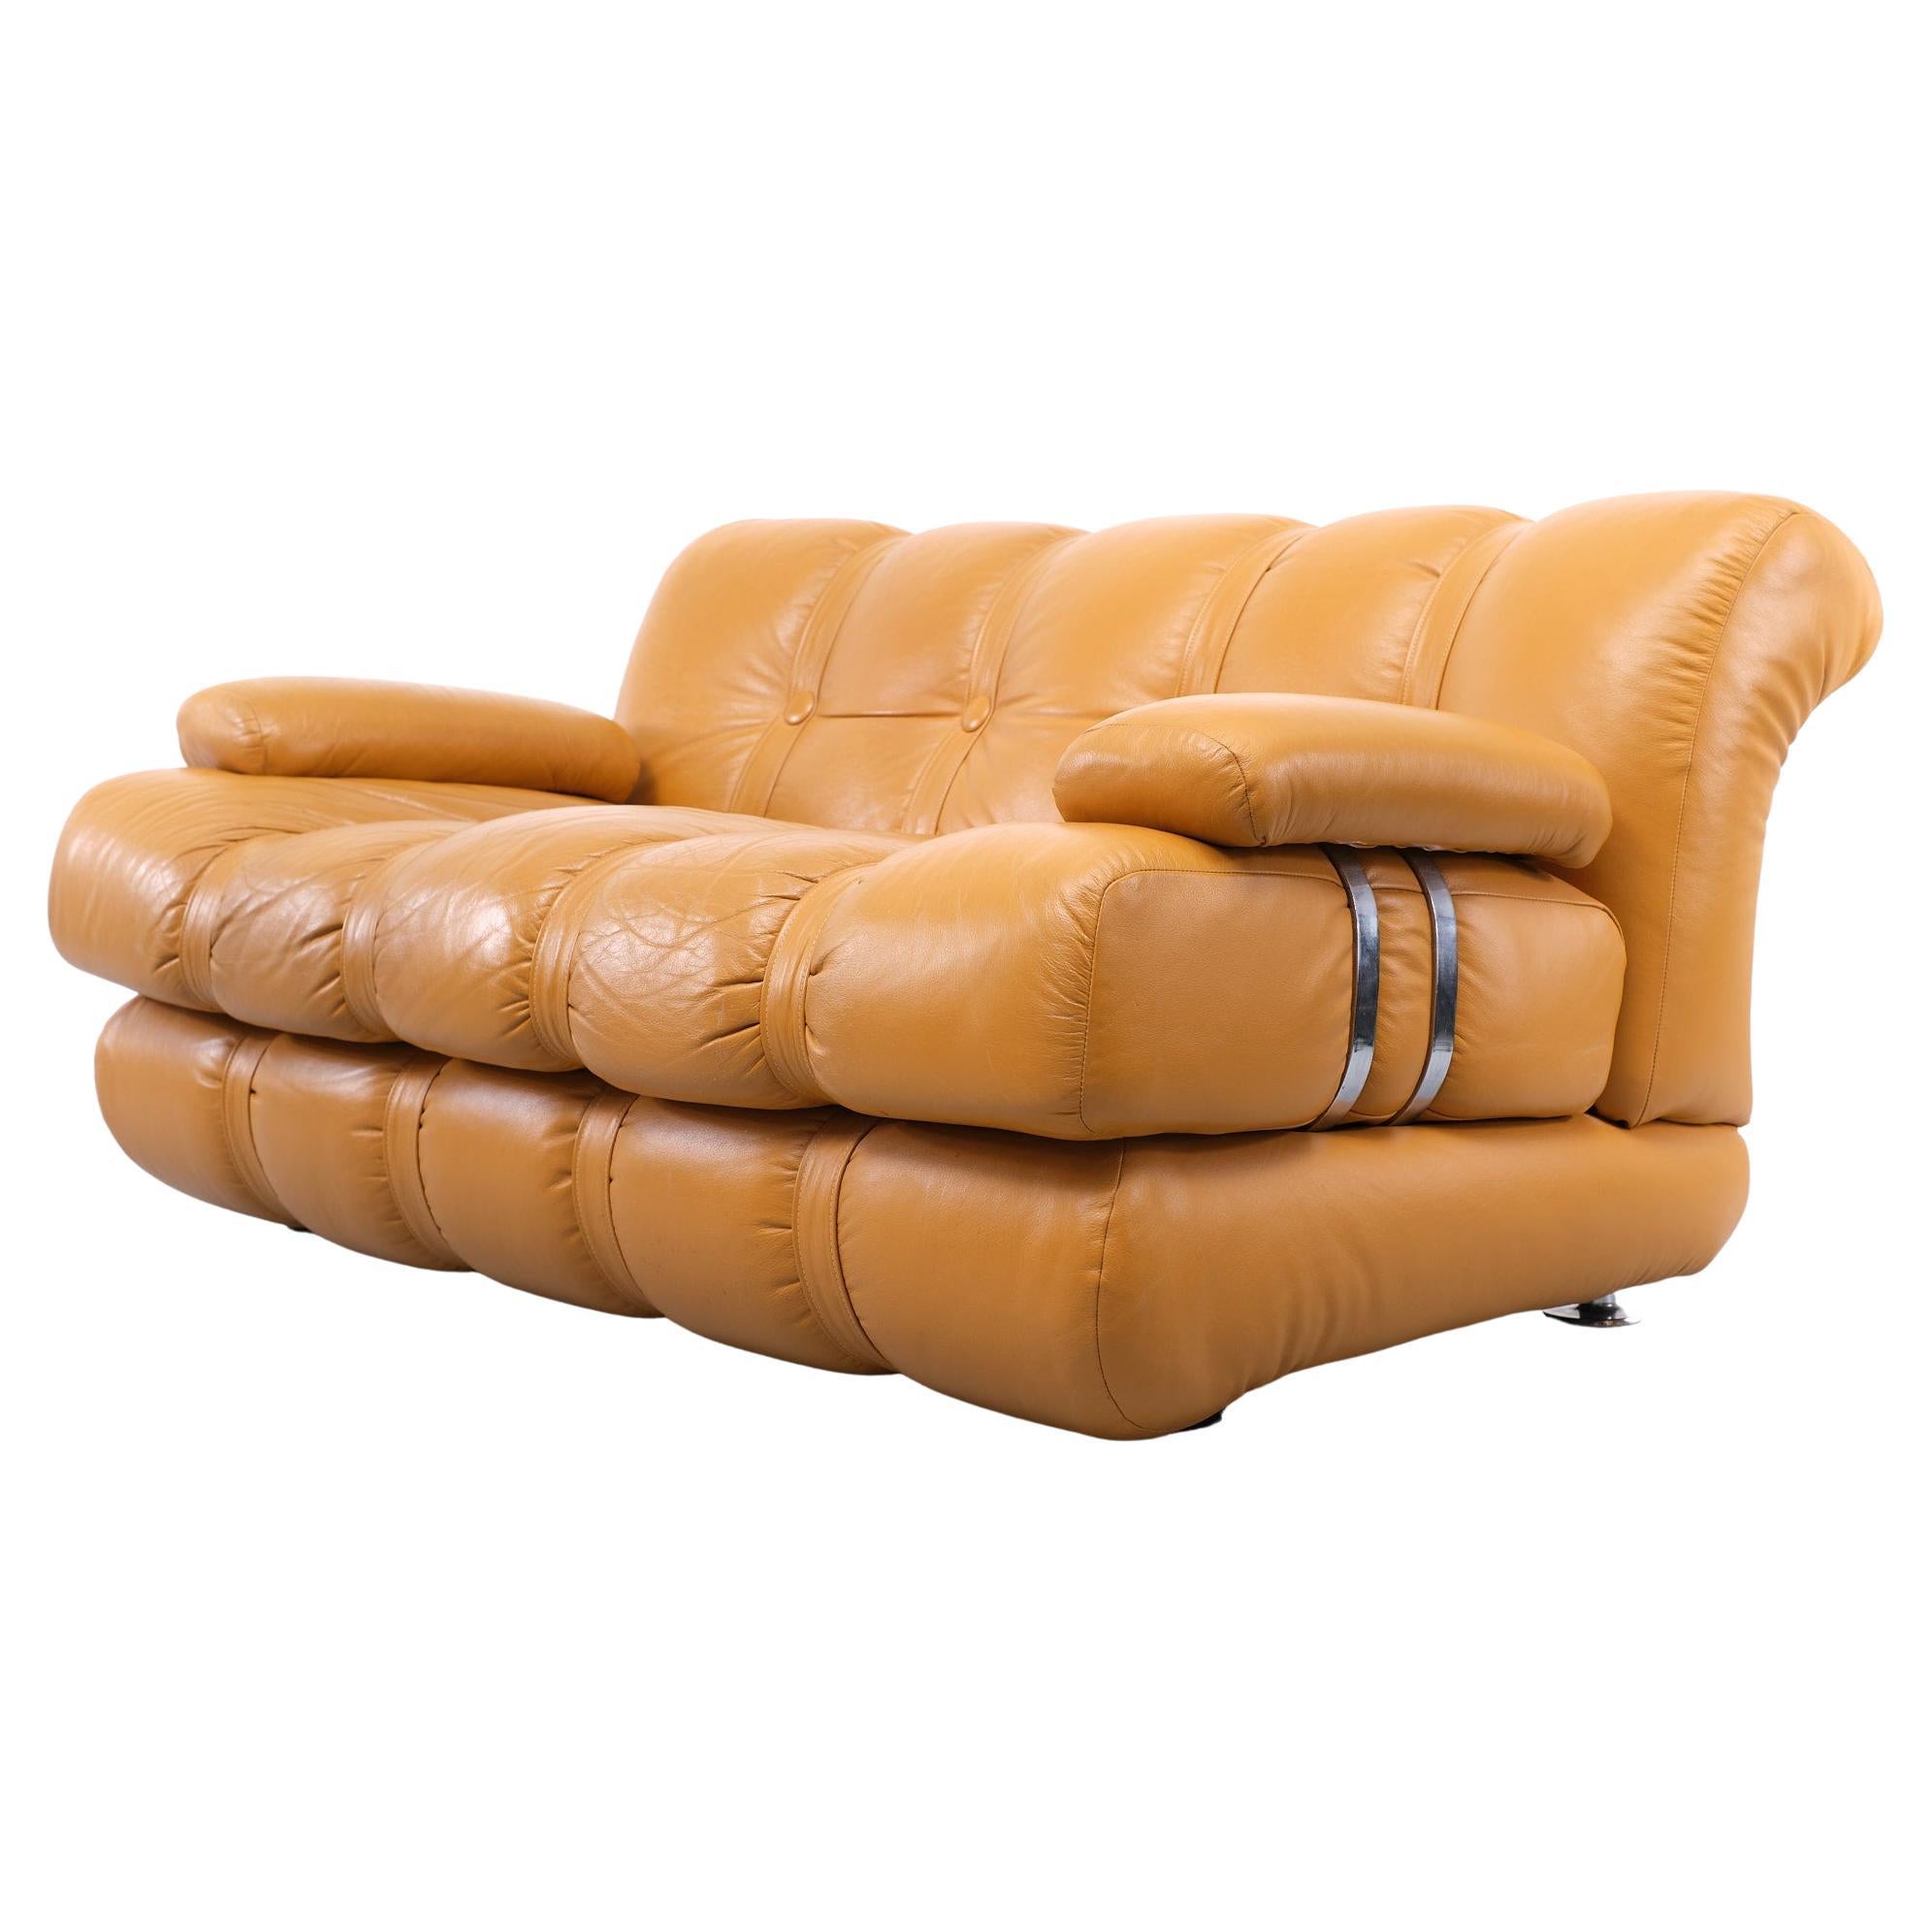 Mid-Century Modern Superb Two seater sofa  Leather  1970s Italy  For Sale